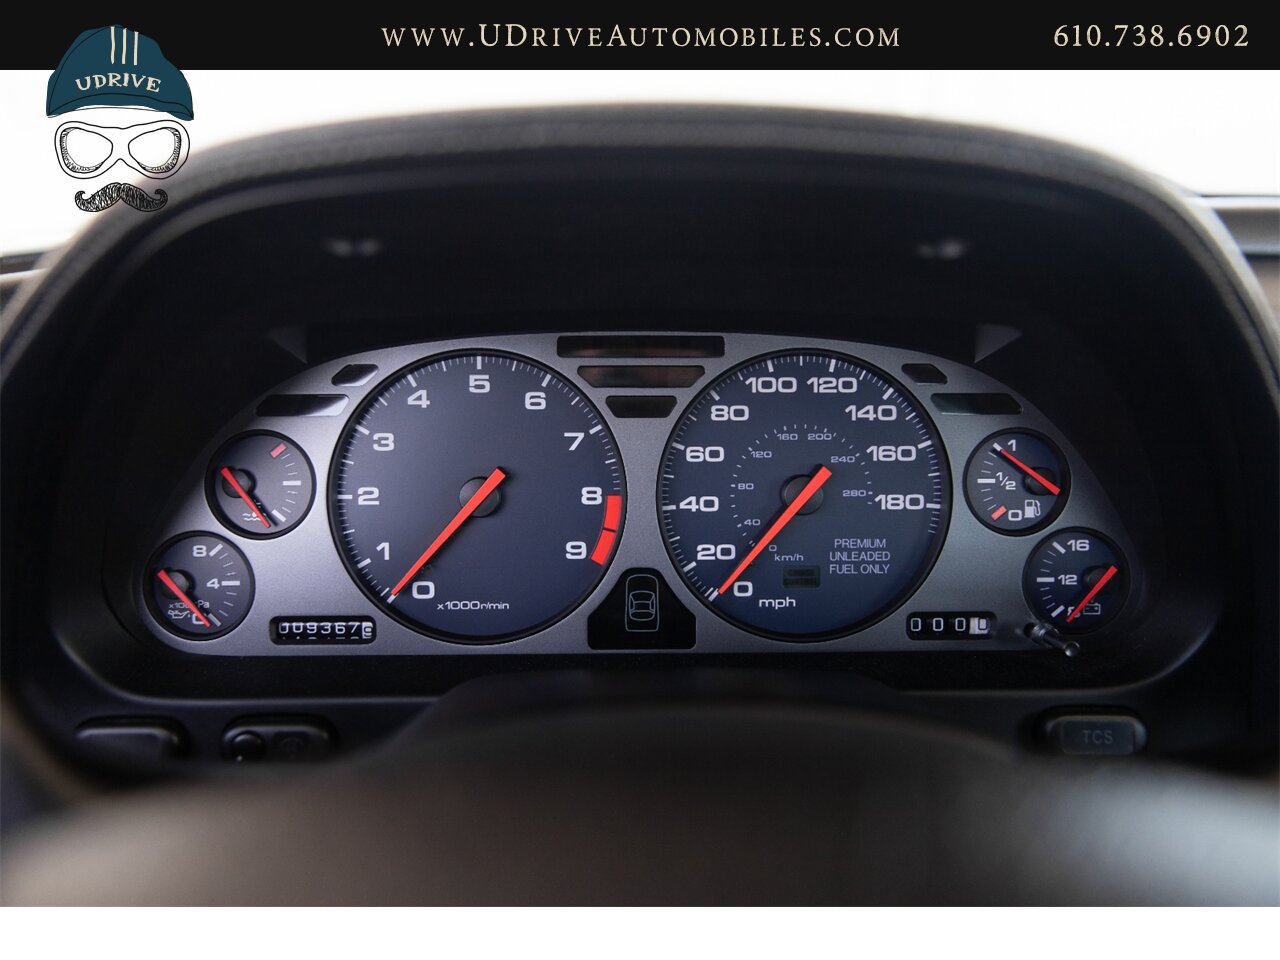 2002 Acura NSX NSX-T 9k Miles 6 Speed Manual Service History  Collector Grade - Photo 31 - West Chester, PA 19382